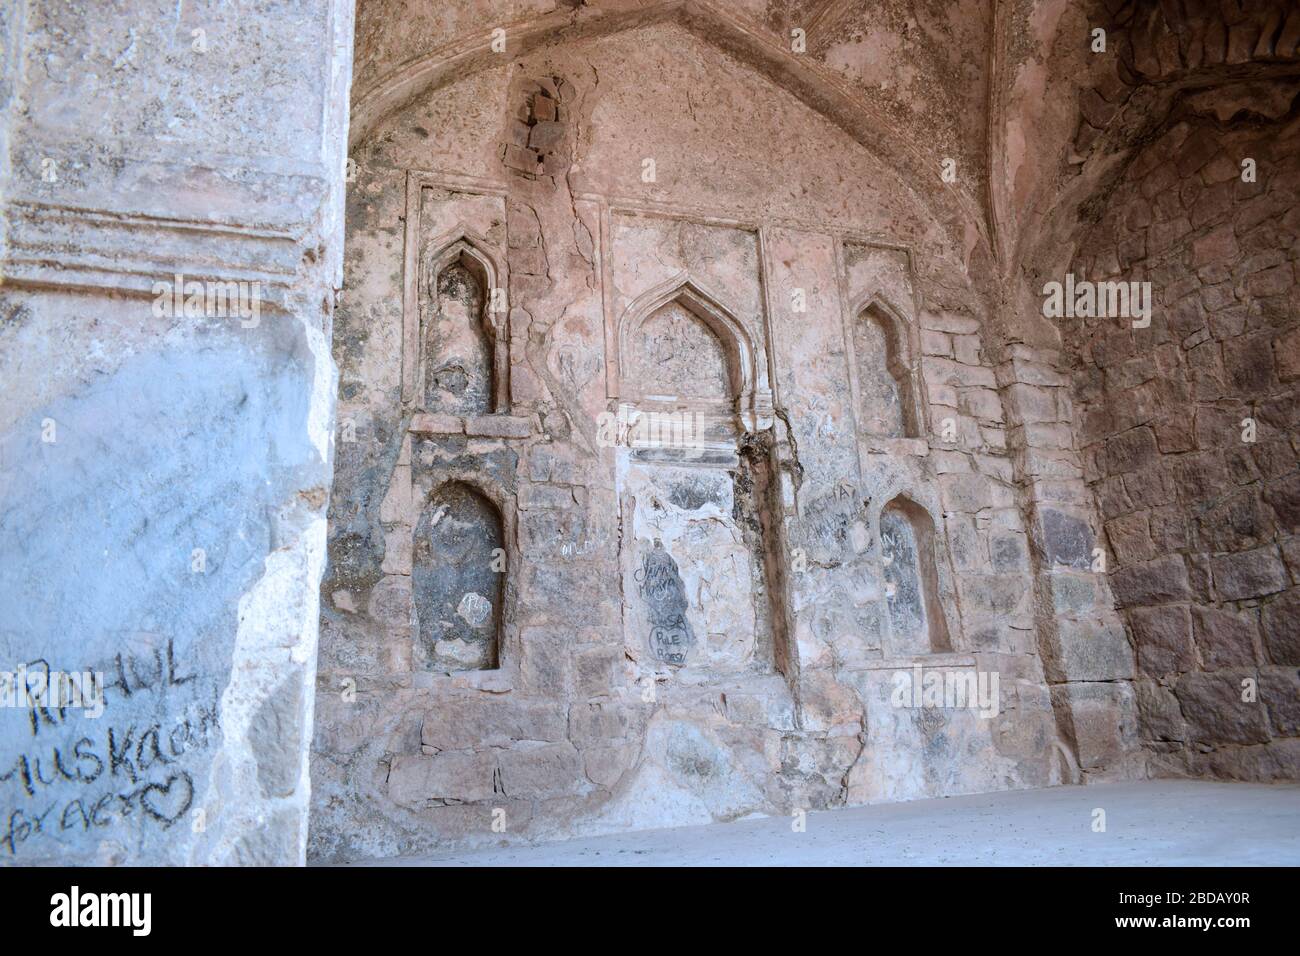 Old Historical Golconda Fort Ruined Walls in India Hintergrundfoto Stockfoto